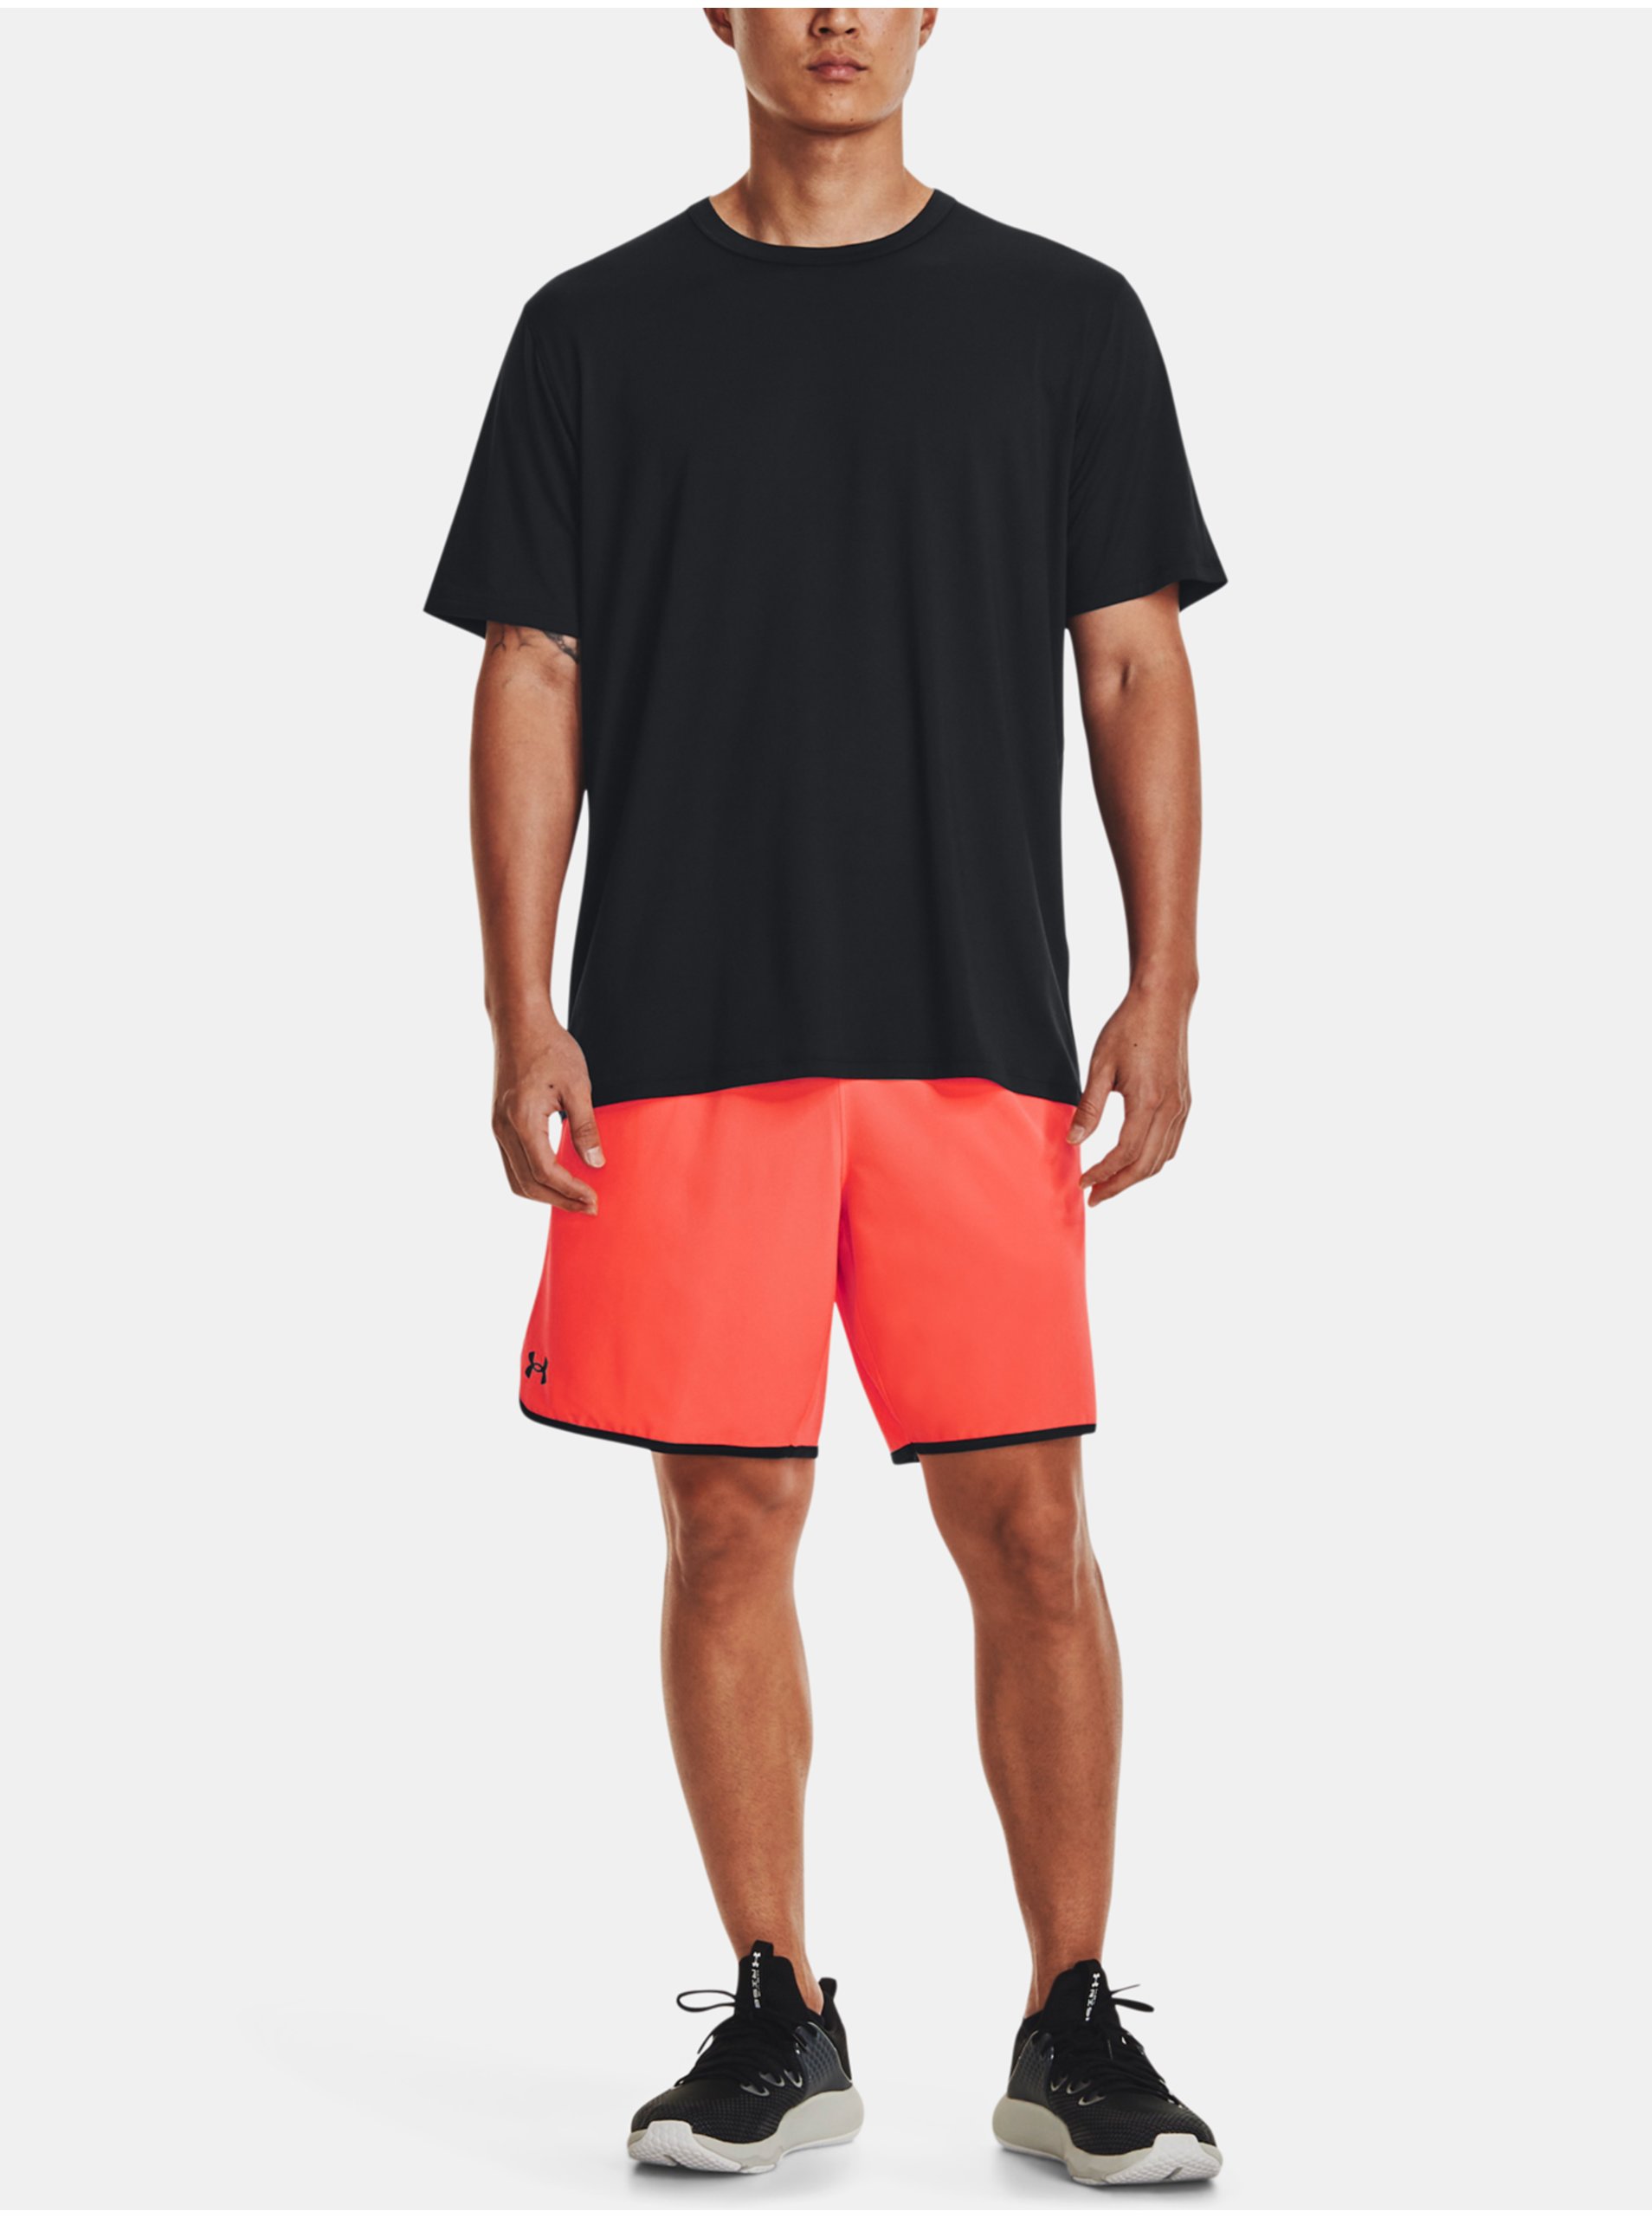 Kraťasy Under Armour UA HIIT Woven 8in Shorts-ORG